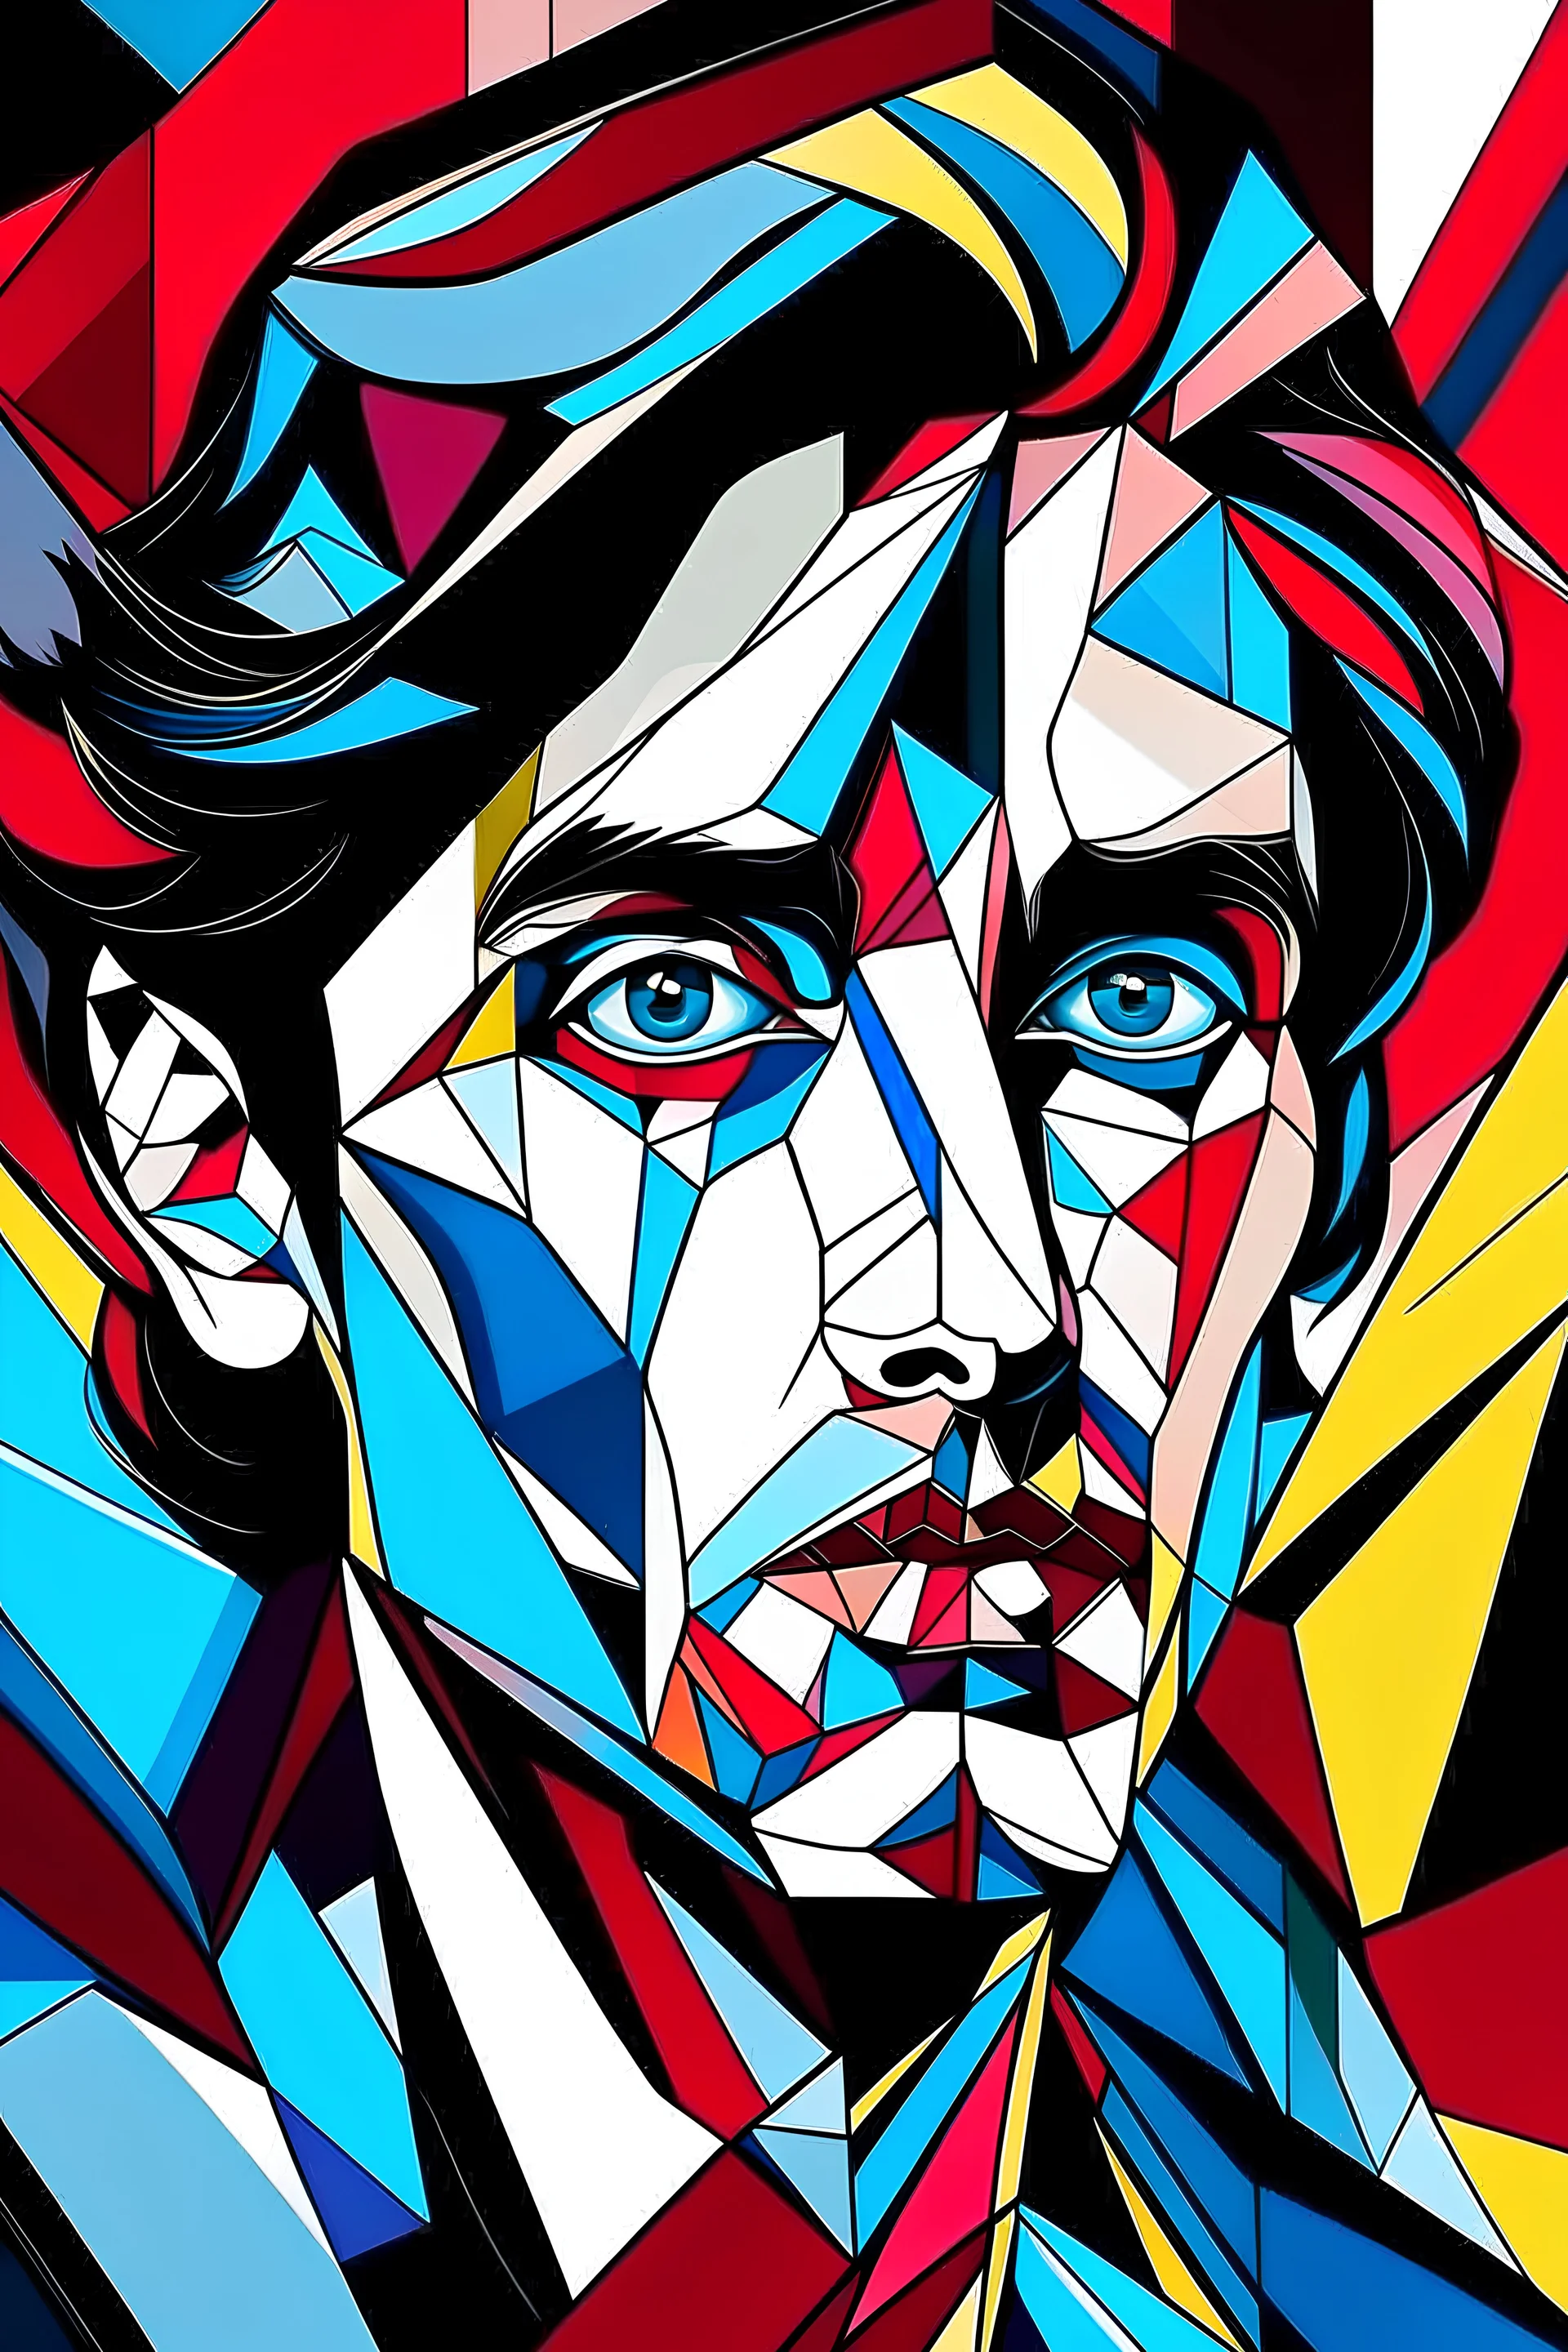 black bold outline, a handsome man with dark hair, blue eye, maroon lips, in saree designed in style of cubism, realistic, pop art style